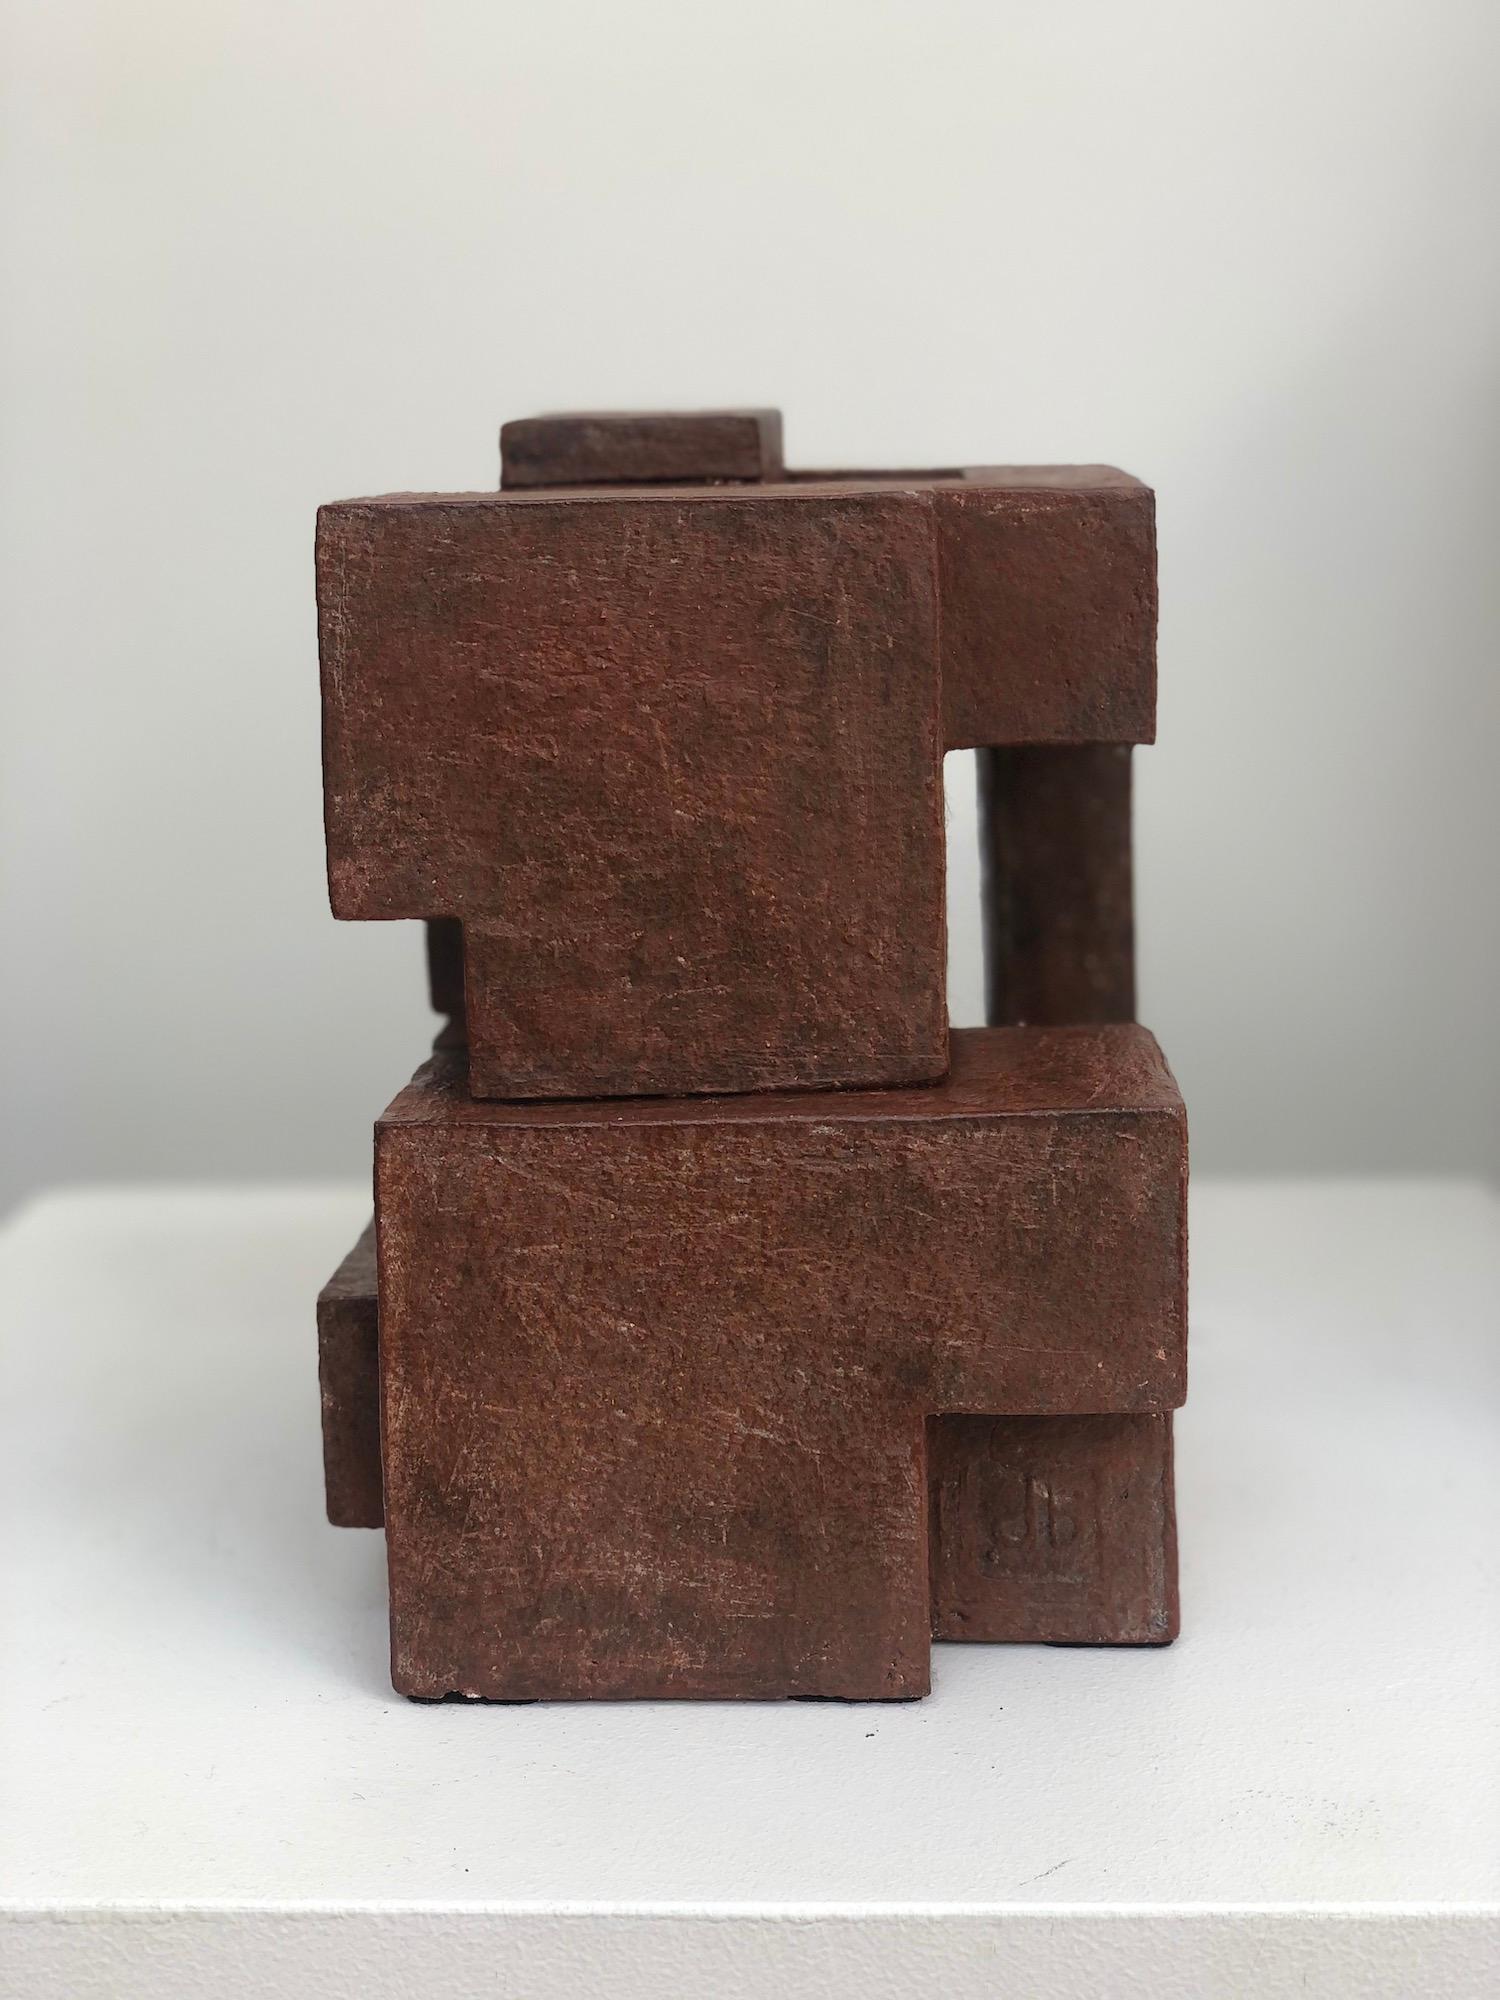 Block VIII by Delphine Brabant - Abstract terracotta sculpture, geometric For Sale 1